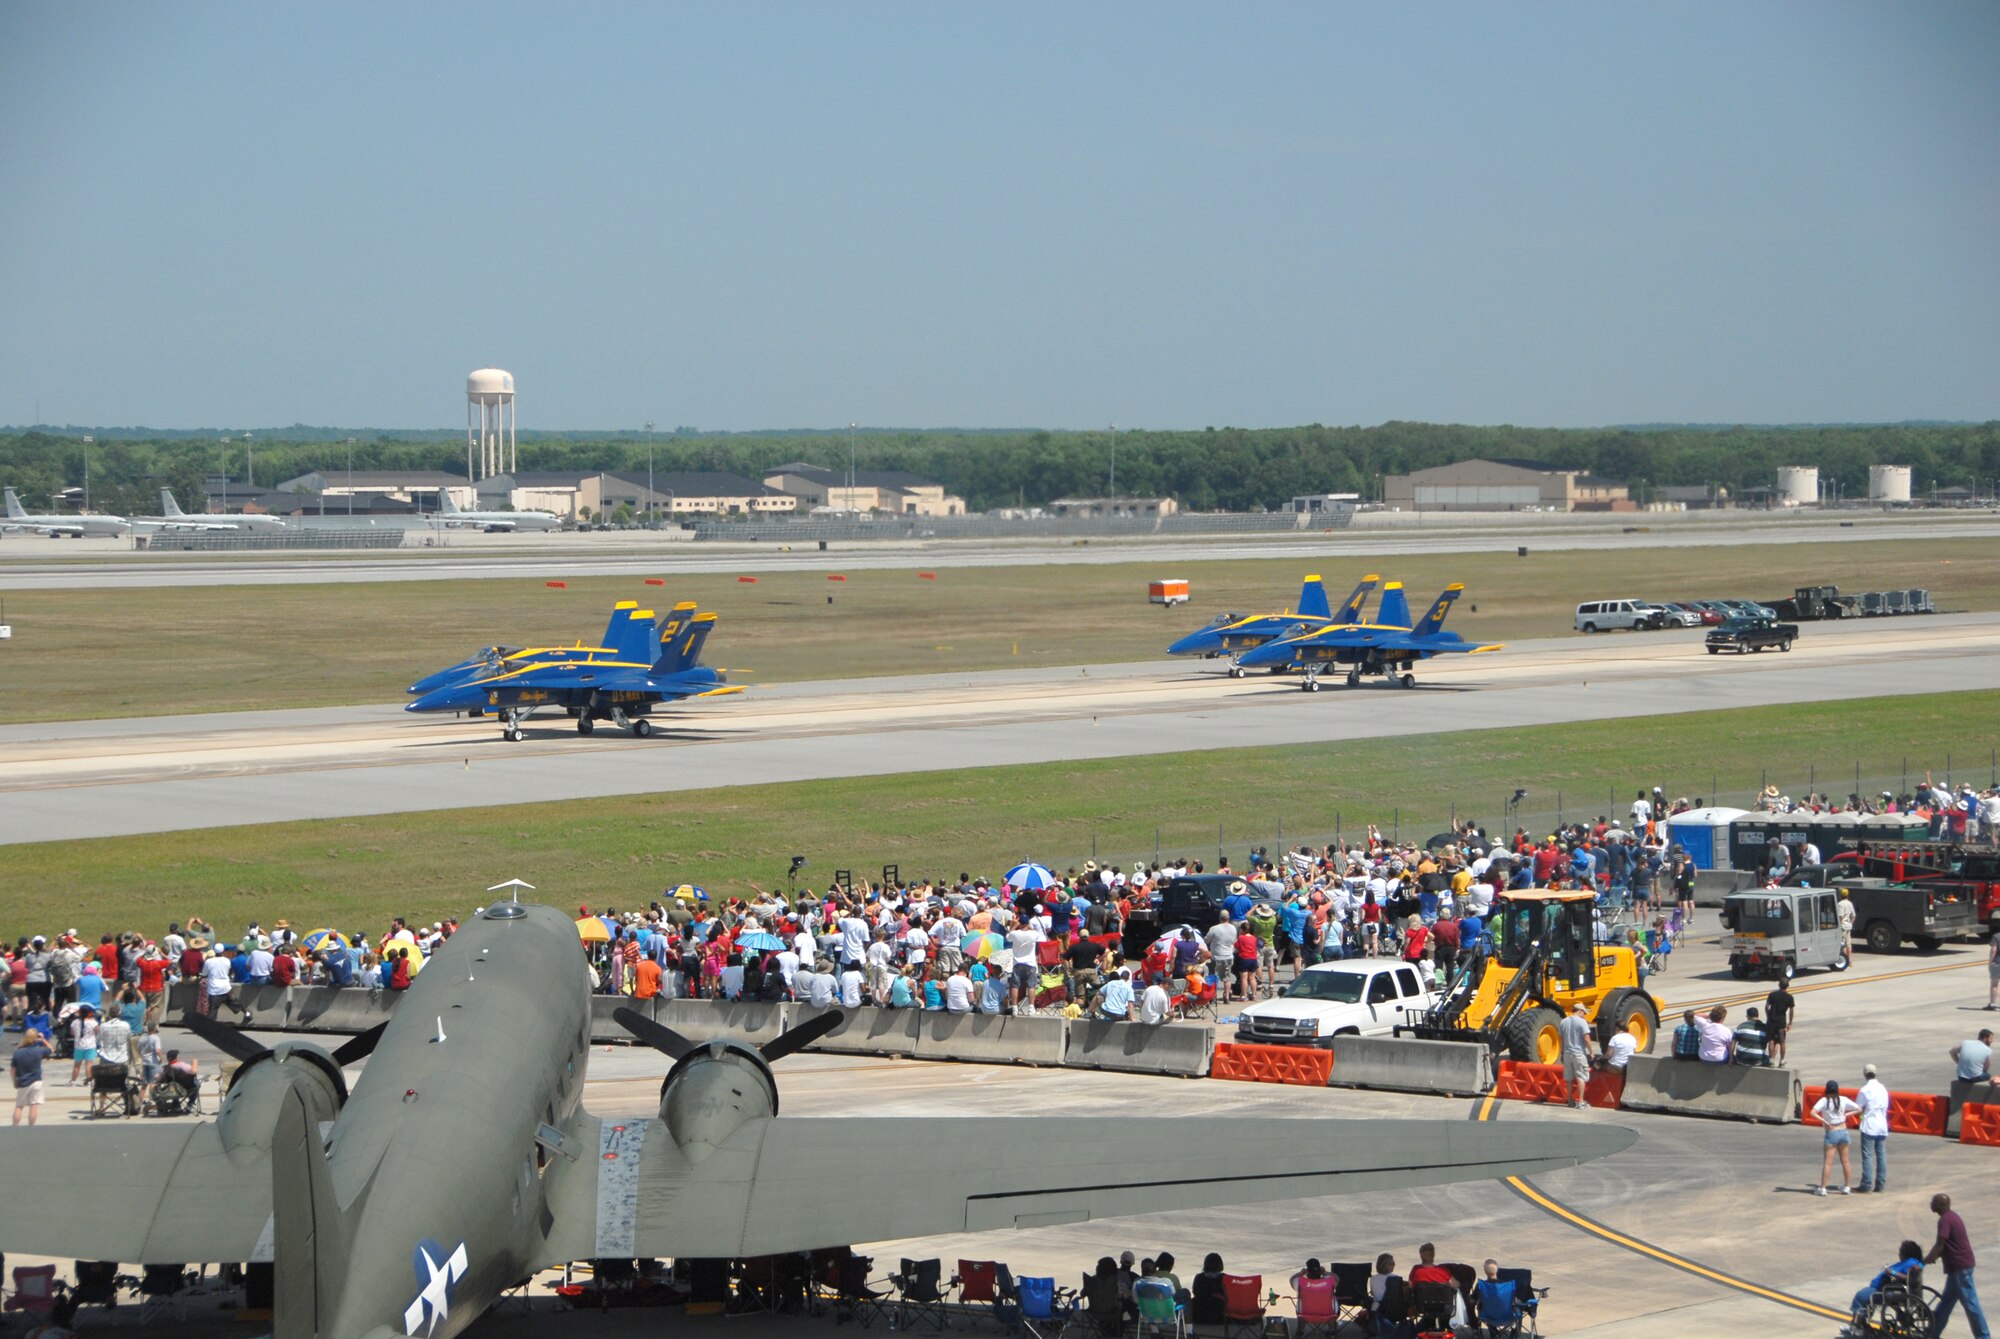 An ariel photo taken at the 2012 Robins Air Show shows a few of the approximately 100,000 people waiting to see the Blue Angels perform.  (U.S. Air Force photo by Ed Aspera.)